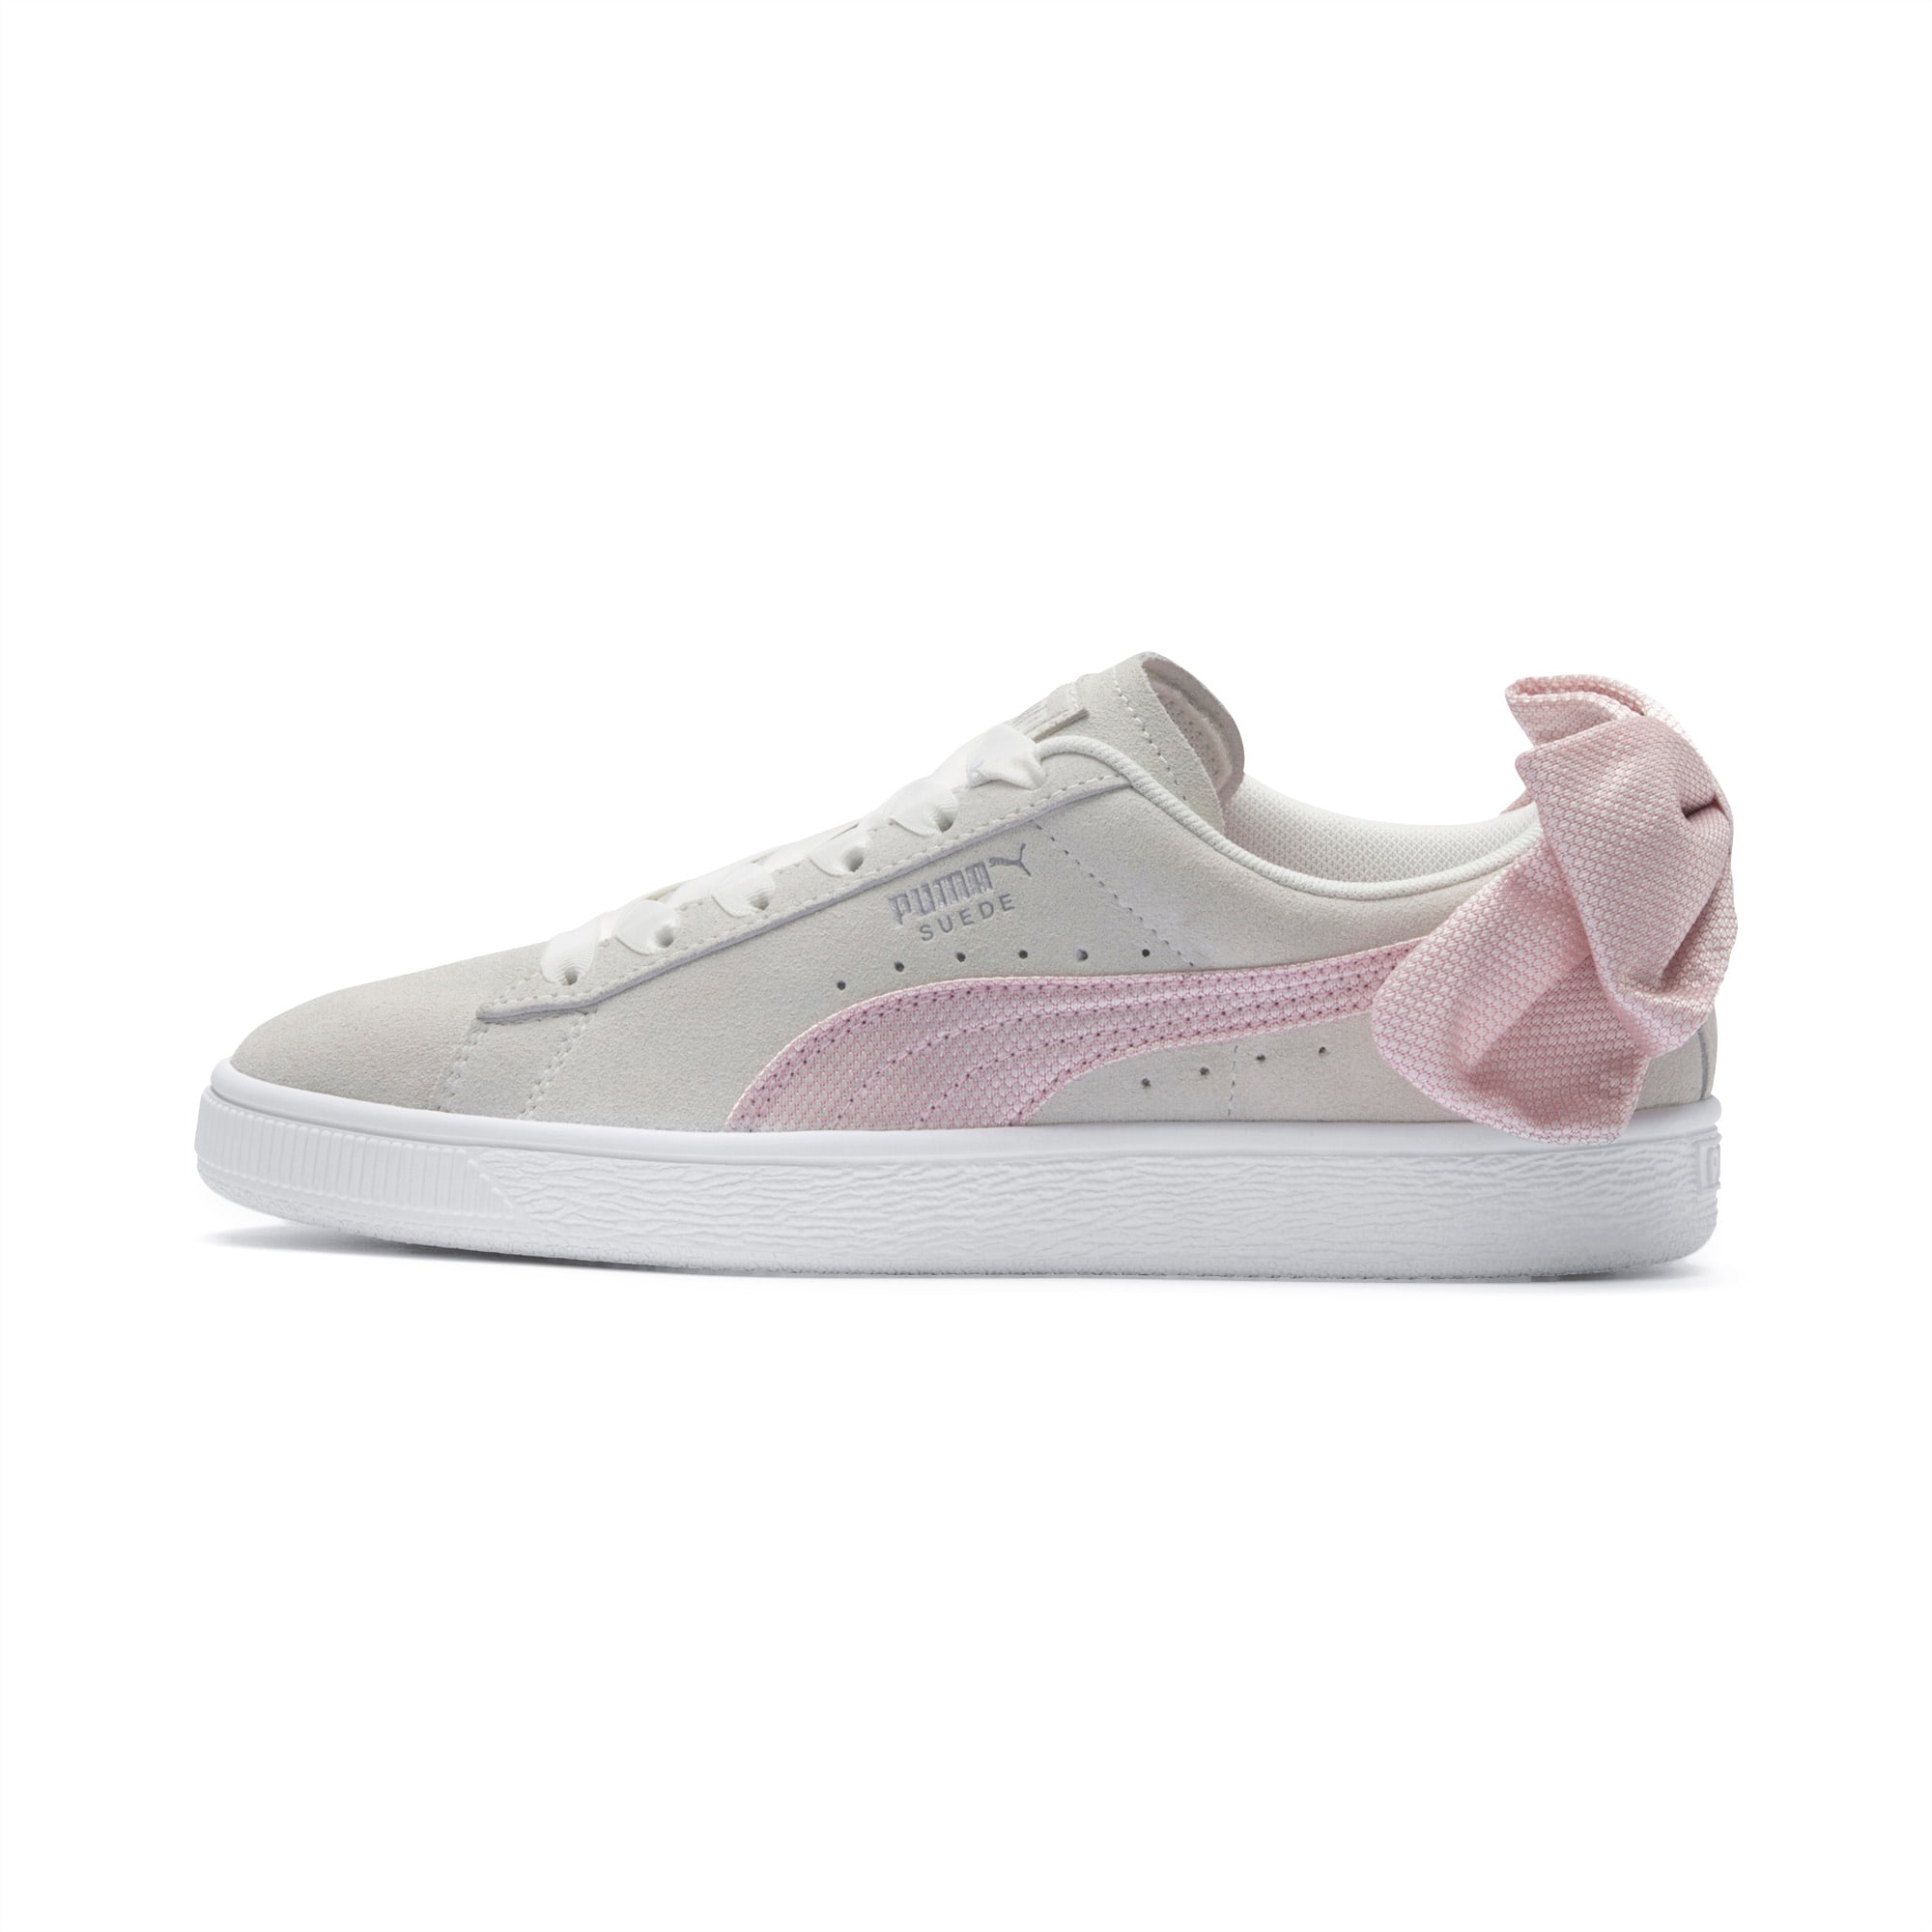 puma suede bow pink - 52% OFF 